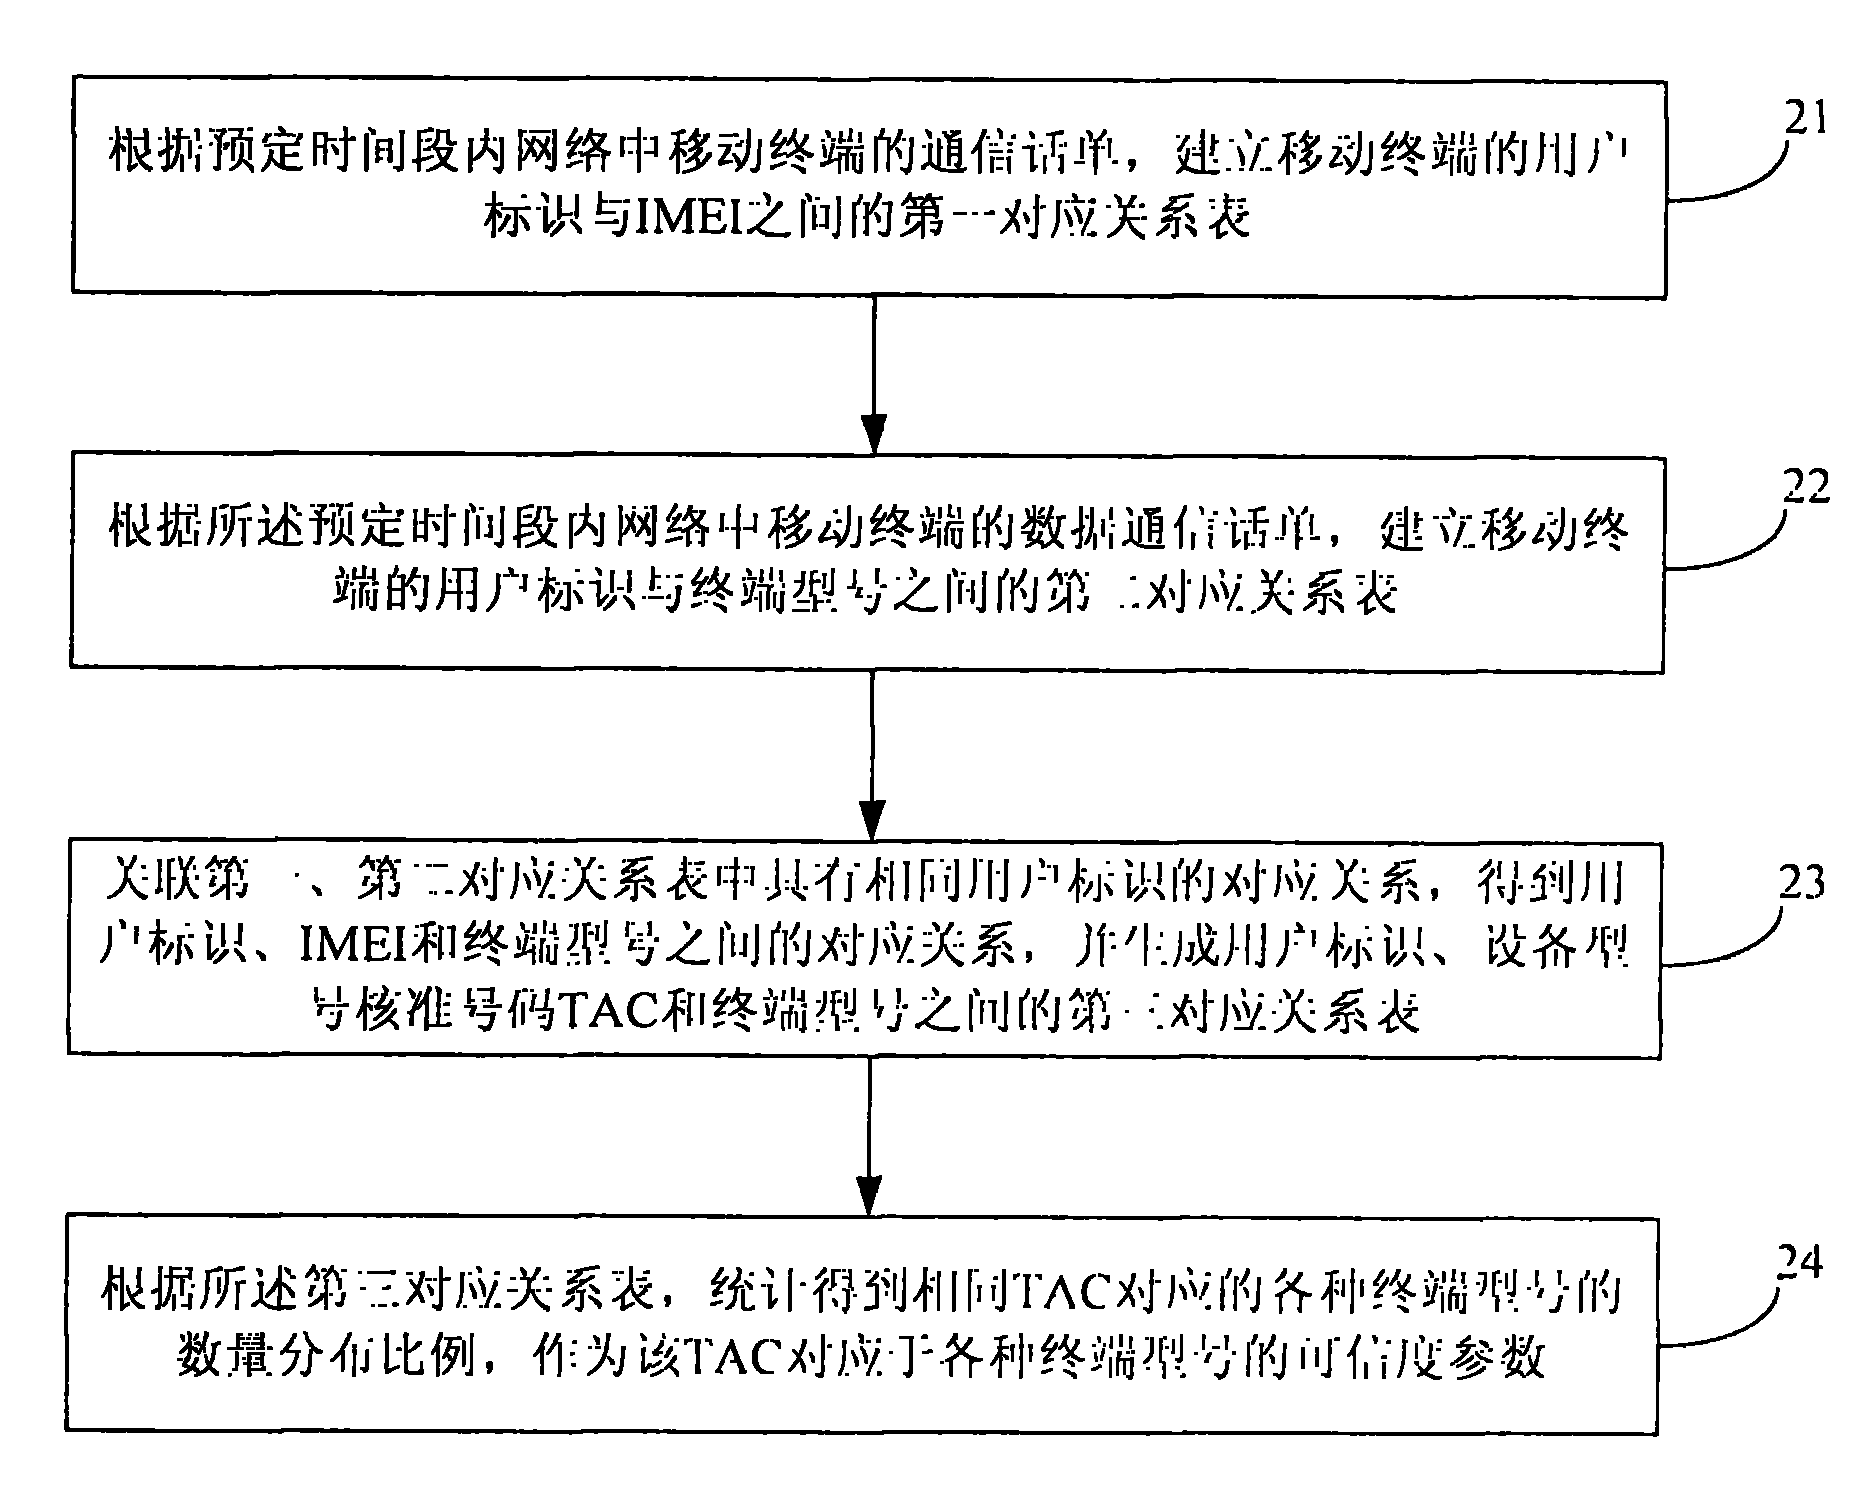 Method for identifying invalid international mobile equipment identity number and apparatus thereof